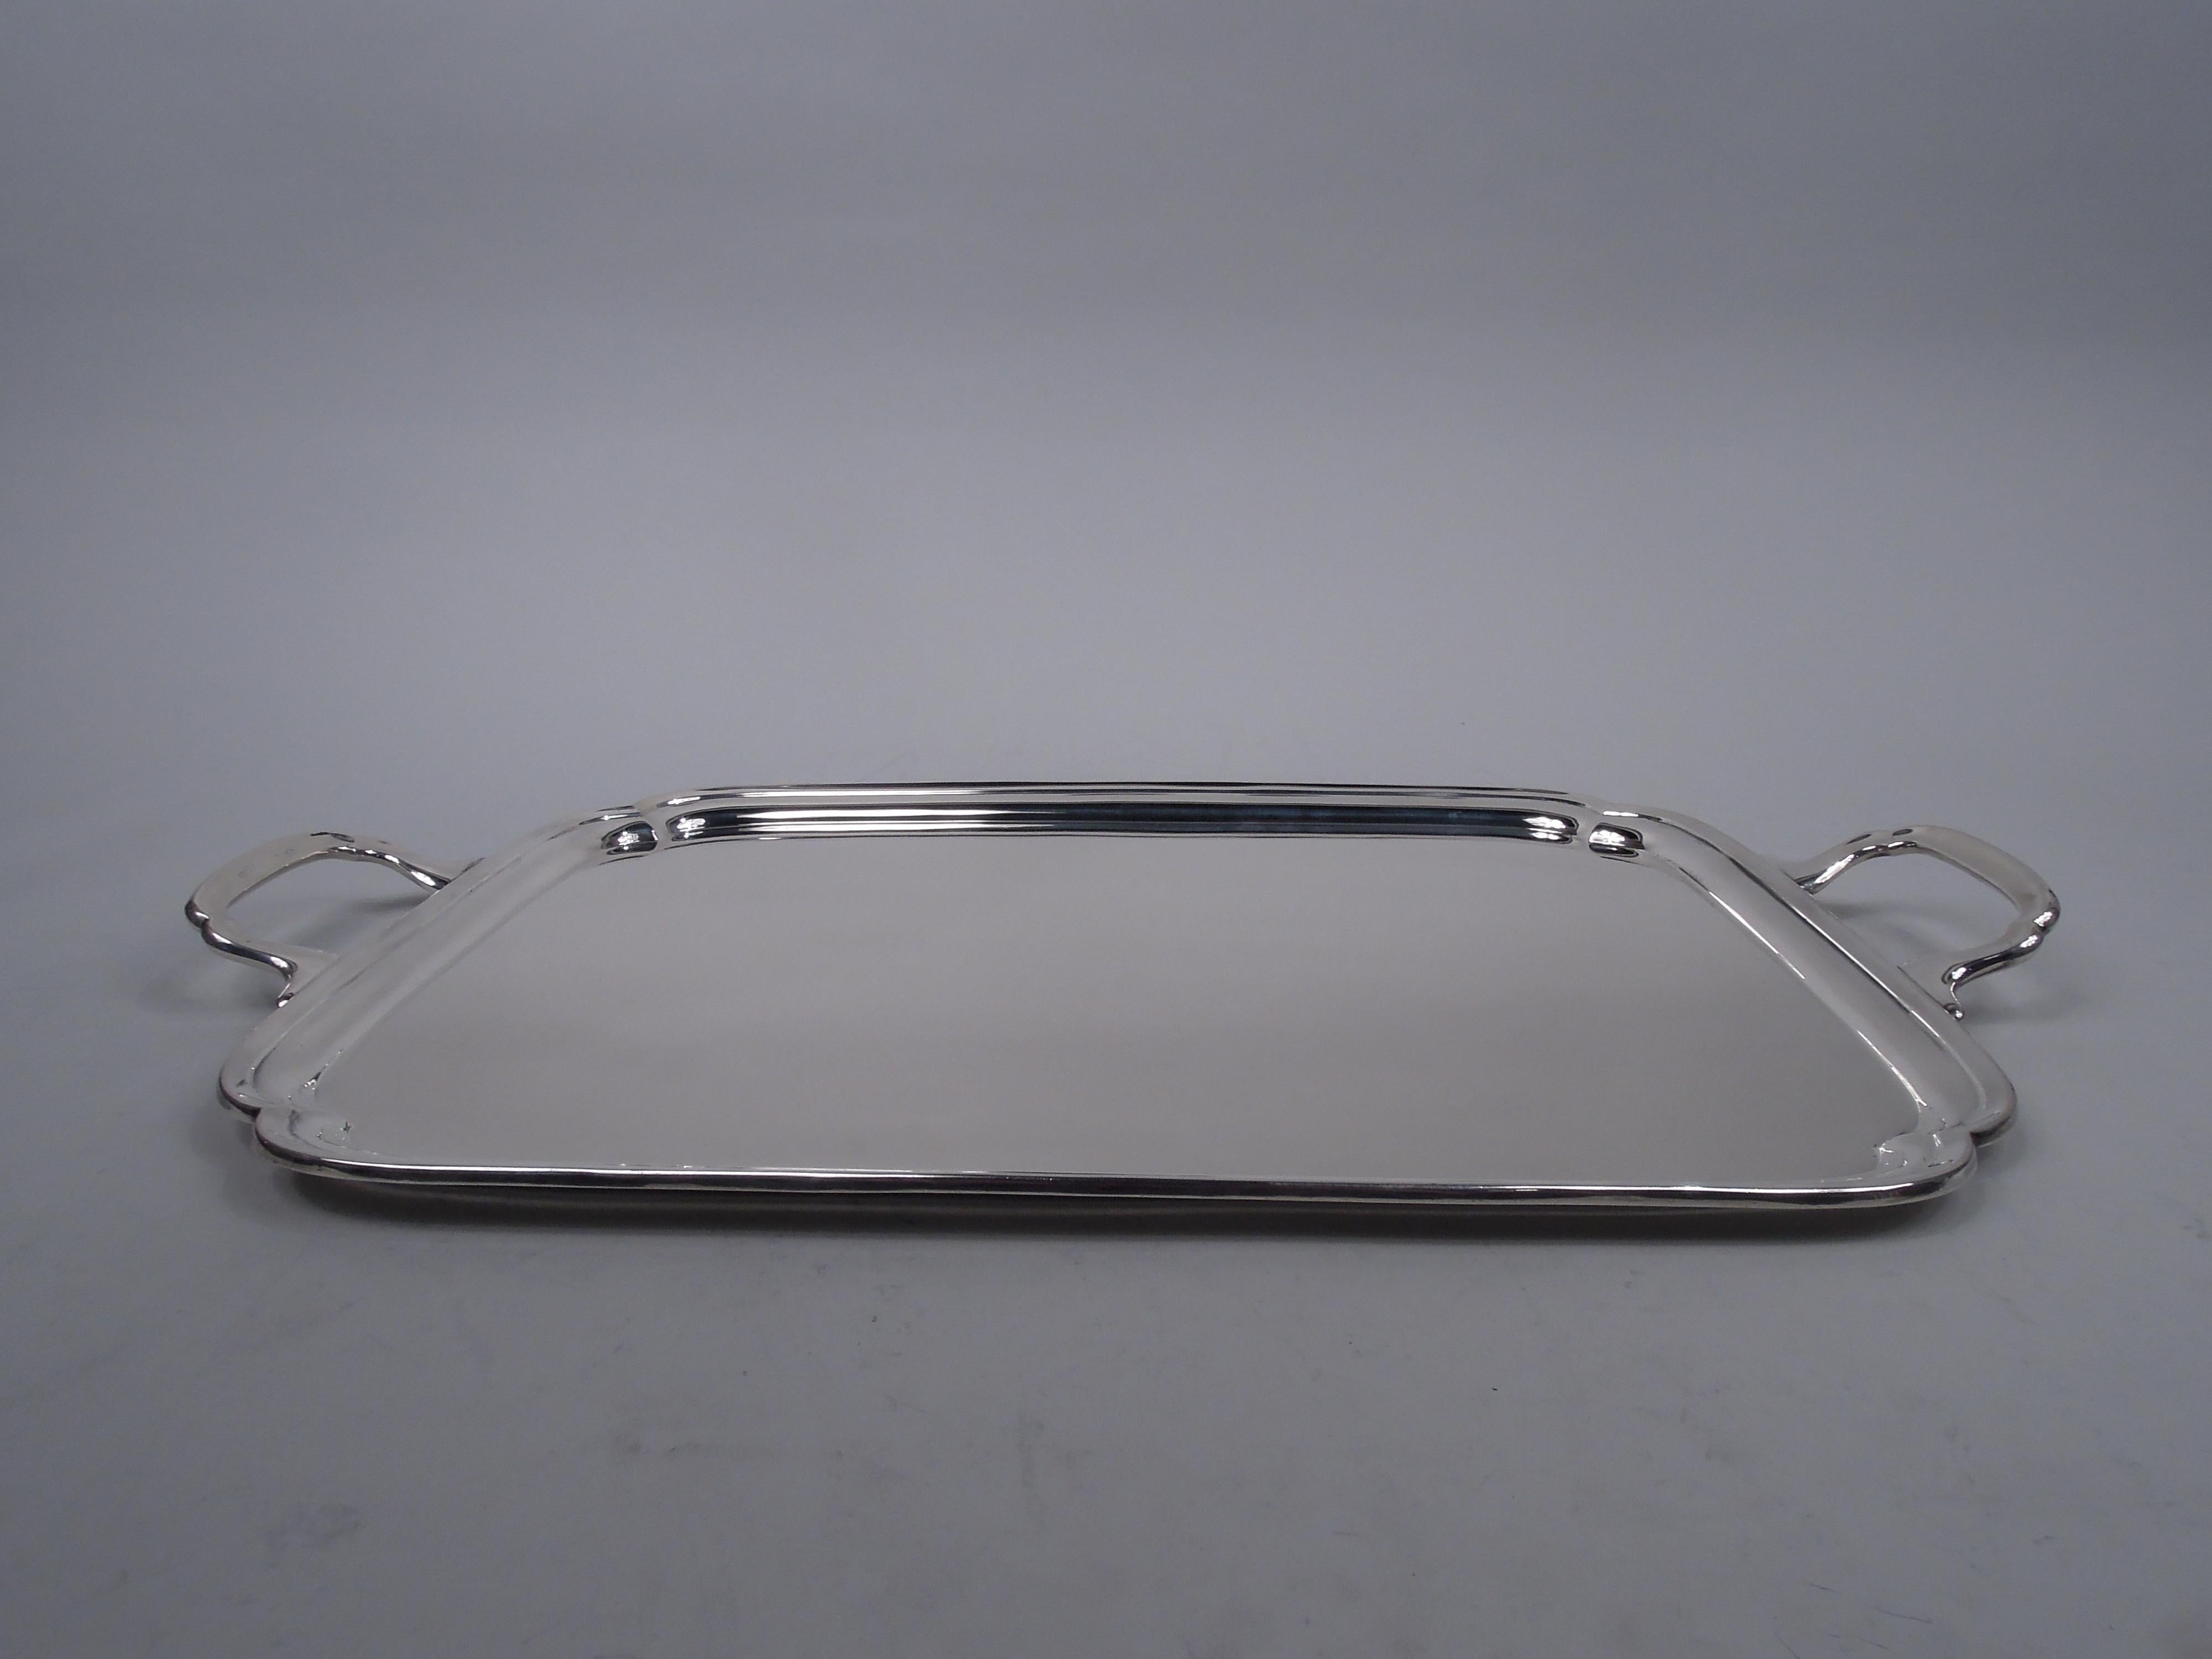 George VI sterling silver tray. Made by Edward Viner in Sheffield in 1950. Rectilinear with molded rim, double c-scroll corners, and bracket end handles. Fully marked including no. 0102/18 and stamp for Cheltenham & Co. (Sheffield), a division of